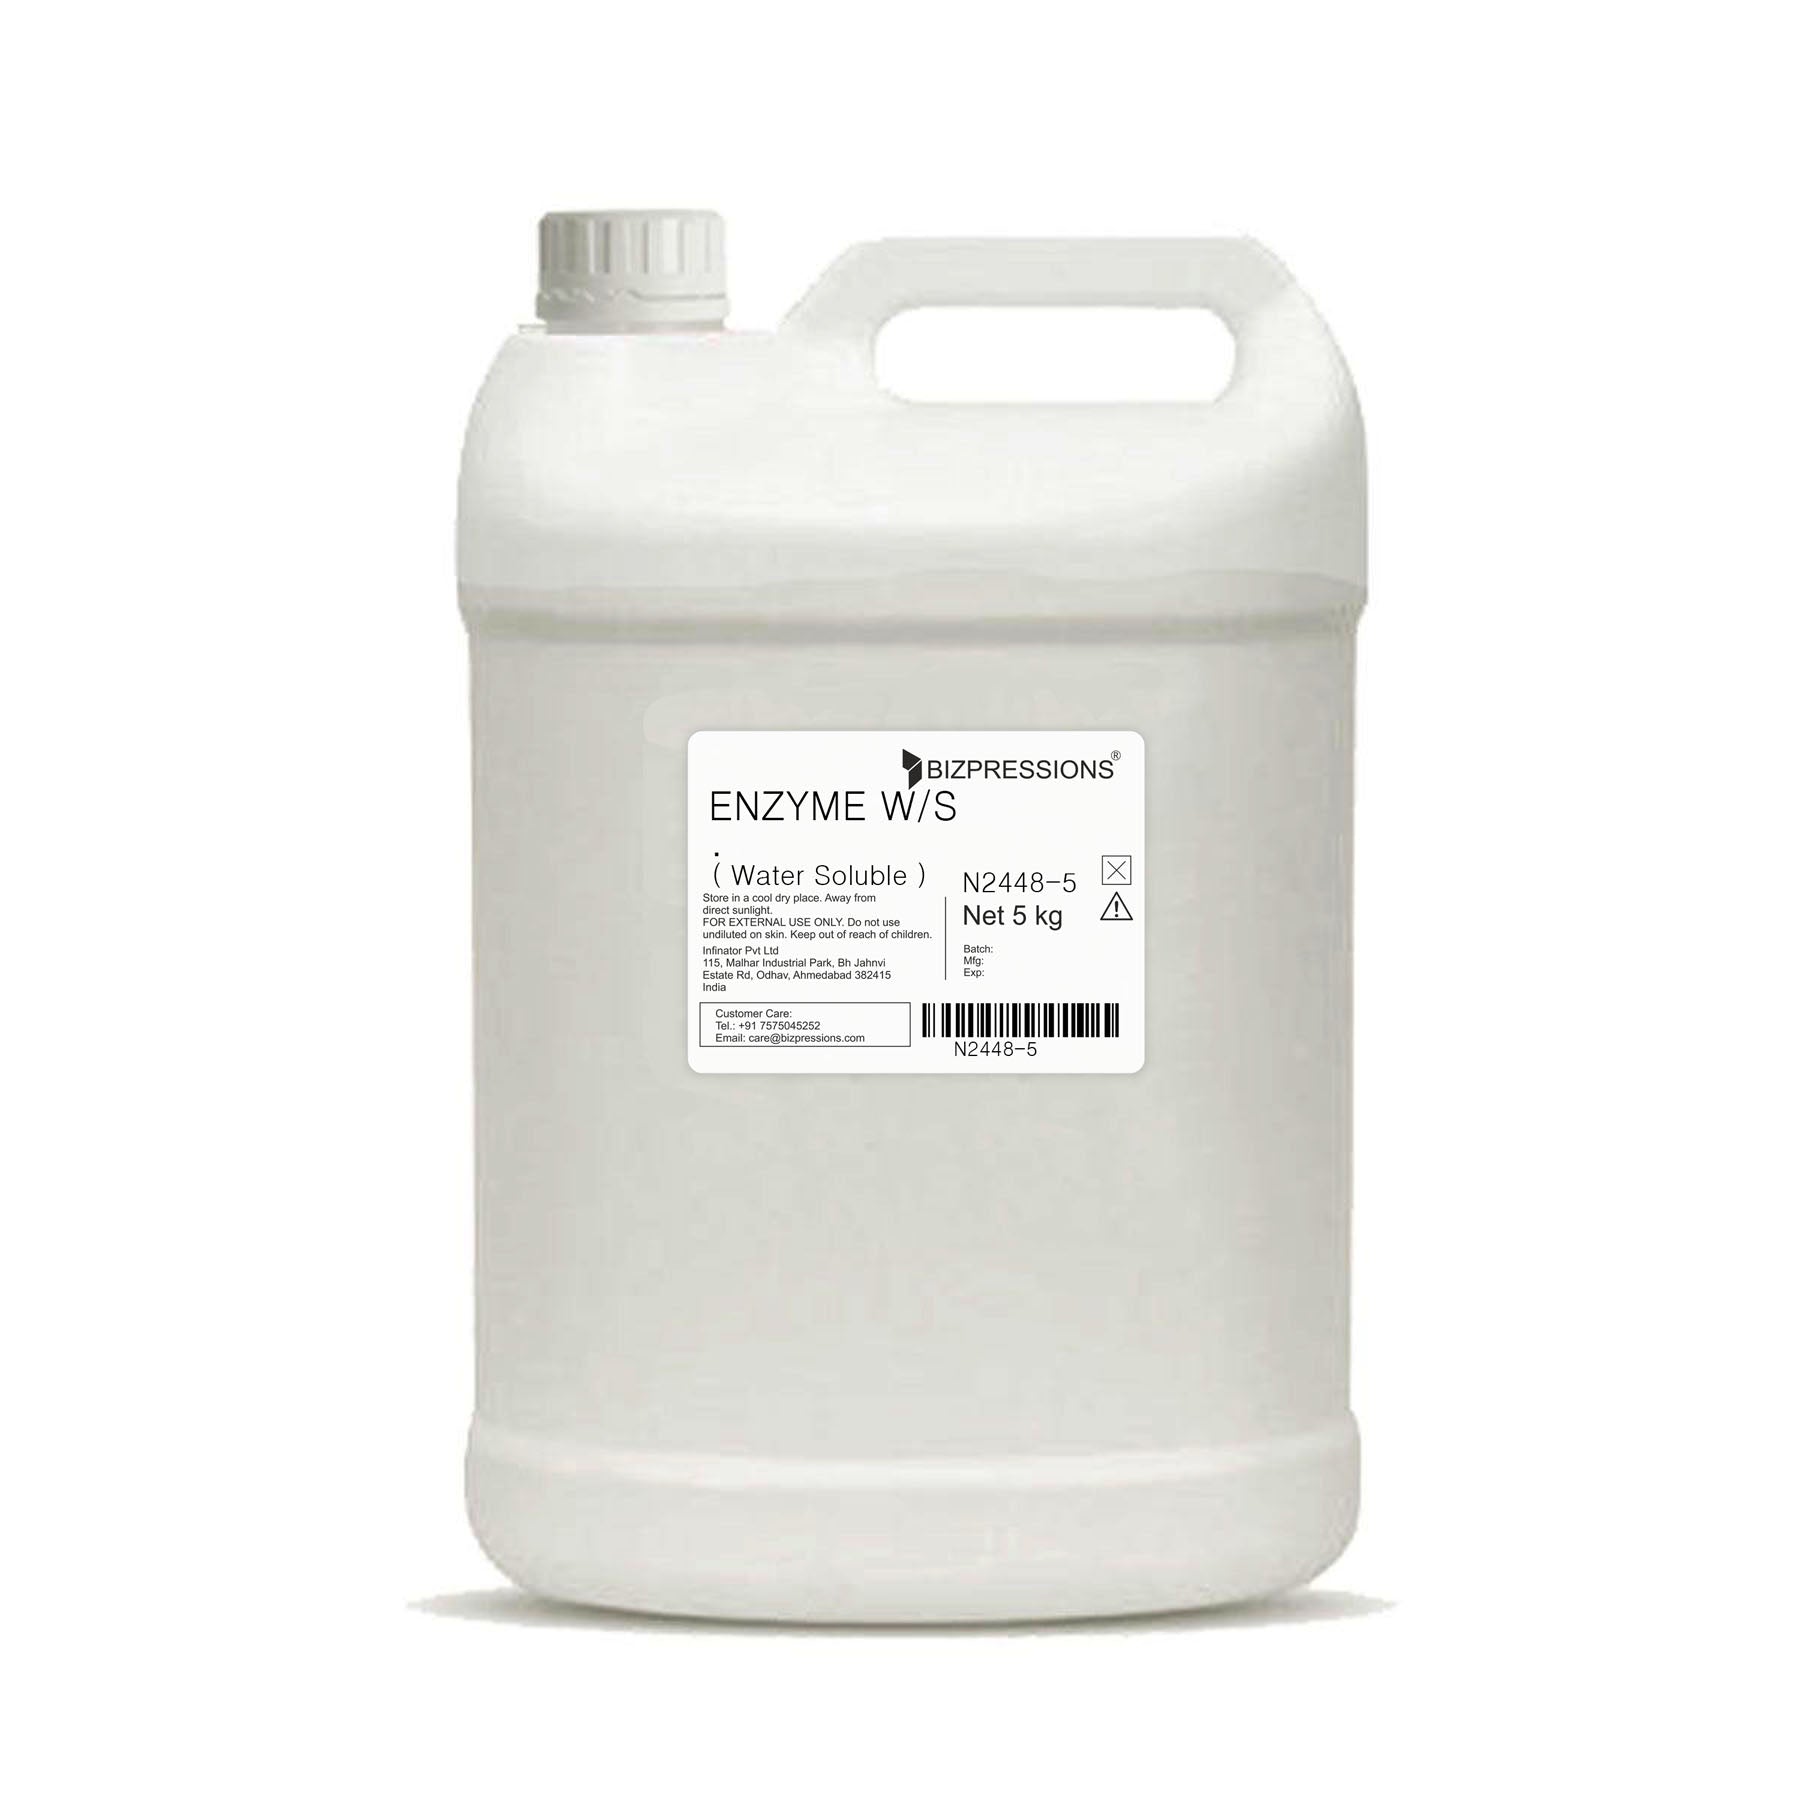 ENZYME W/S - Fragrance ( Water Soluble ) - 5 kg